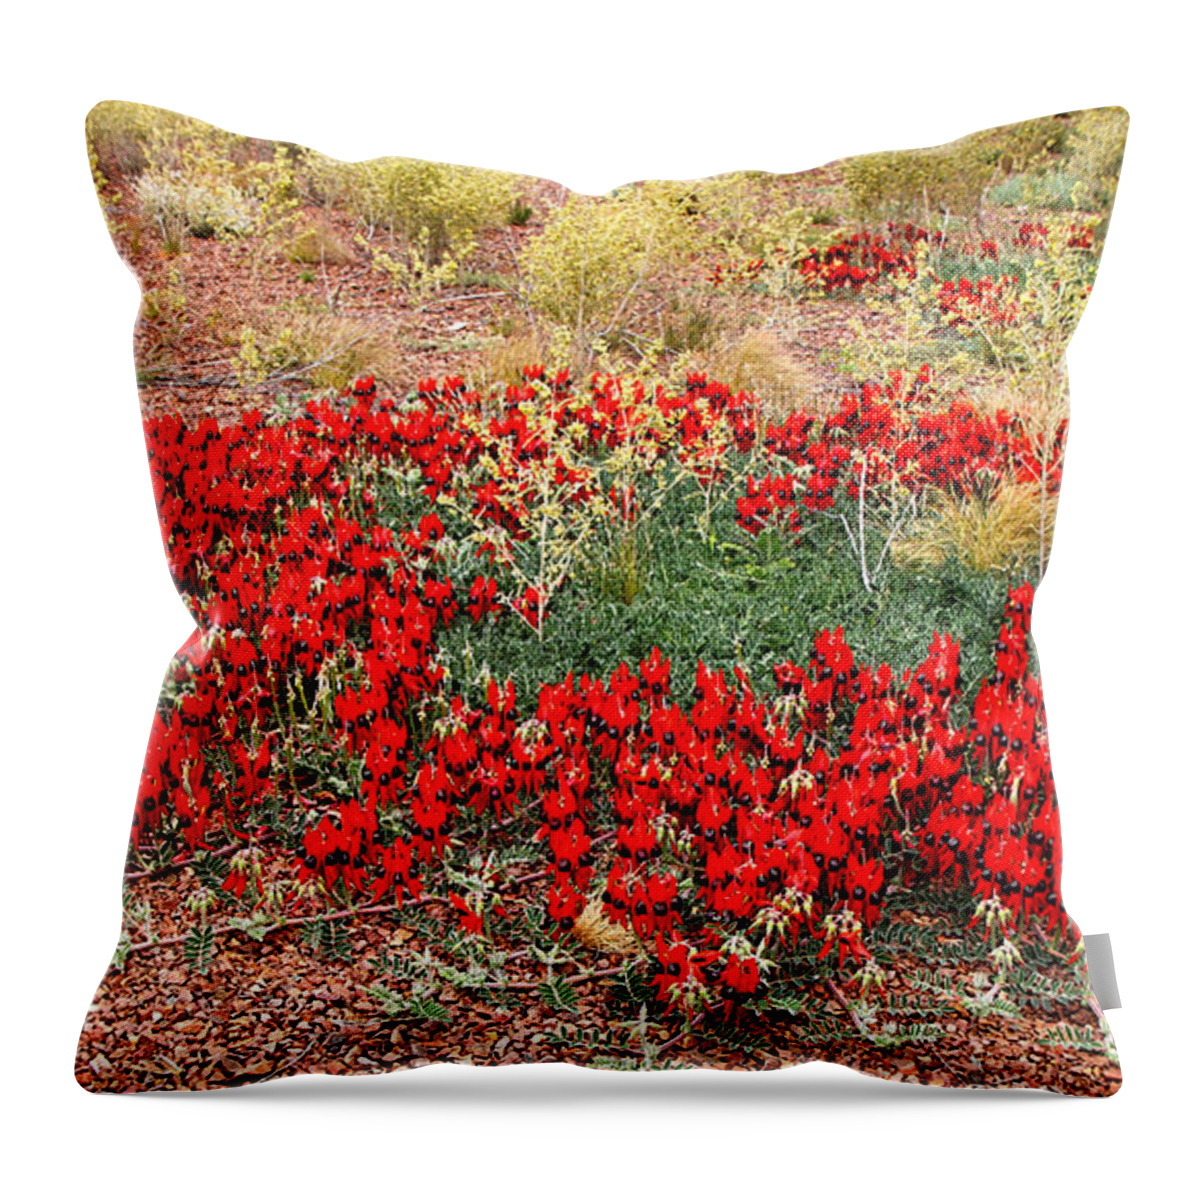 Sturts Desert Pea Throw Pillow featuring the photograph Sturt's Desert Pea Outback South Australia #11 by Carole-Anne Fooks